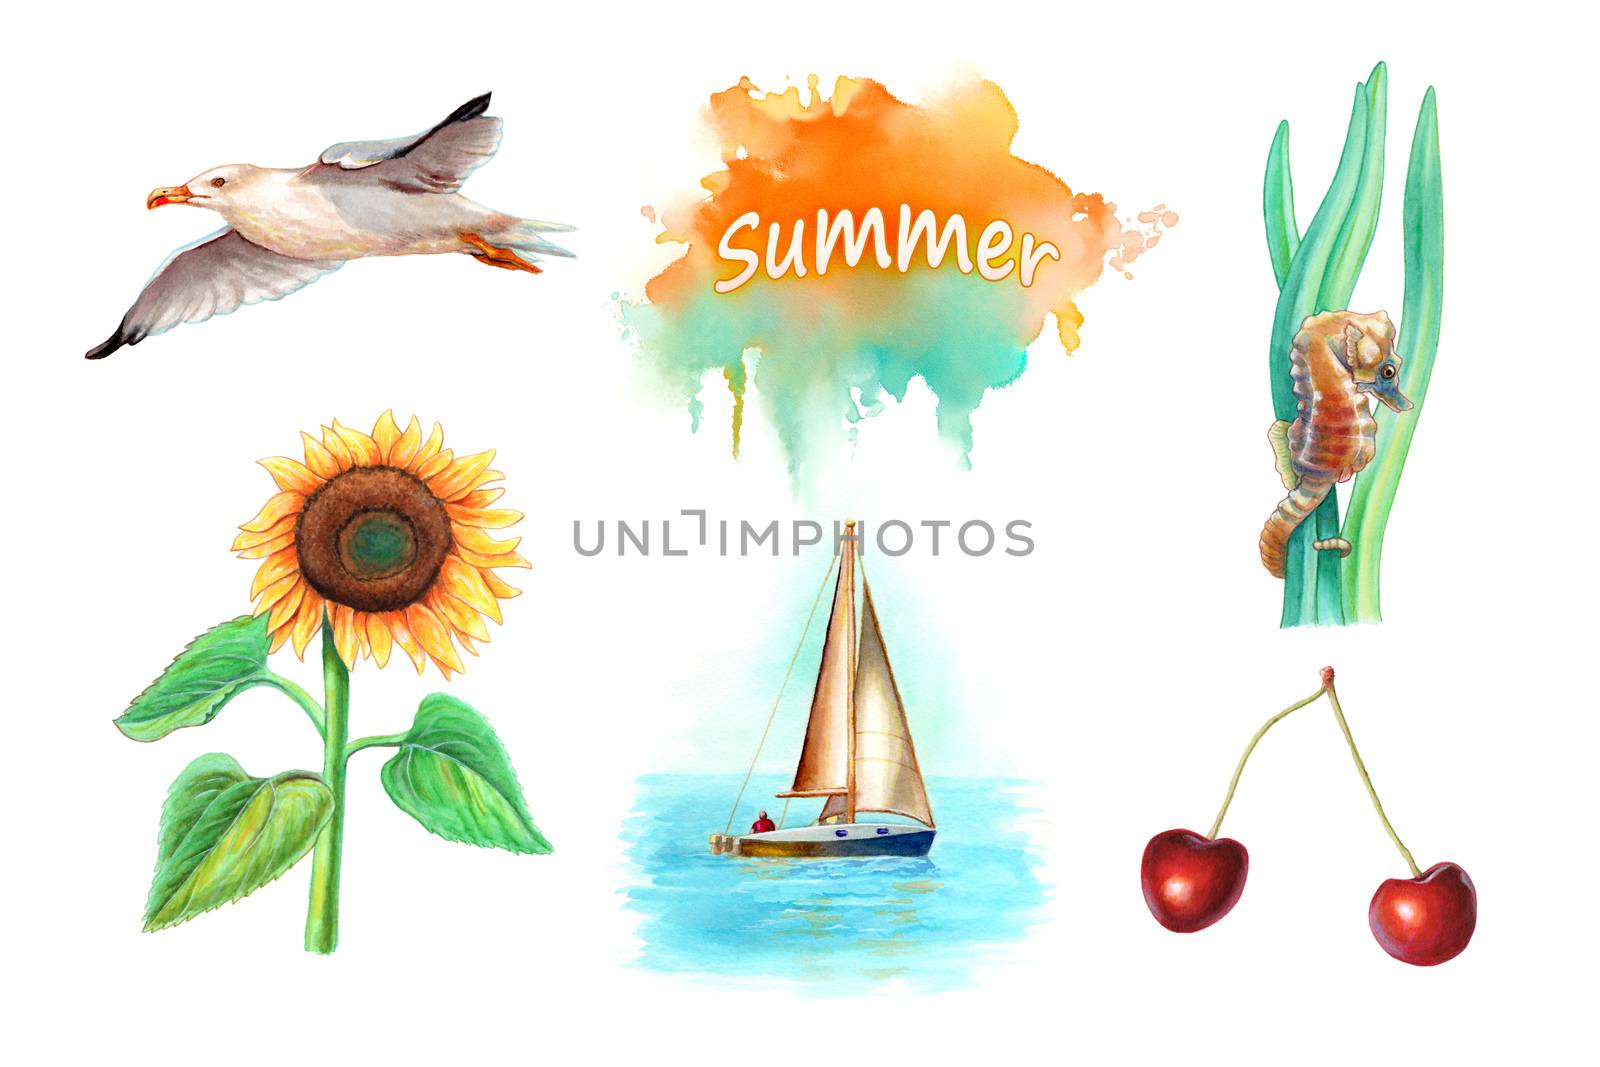 Collection of five summer themed watercolor illustrations, including a seagull, sunflower, seahorse, sail boat and some cherries. Traditional watercolor on paper.